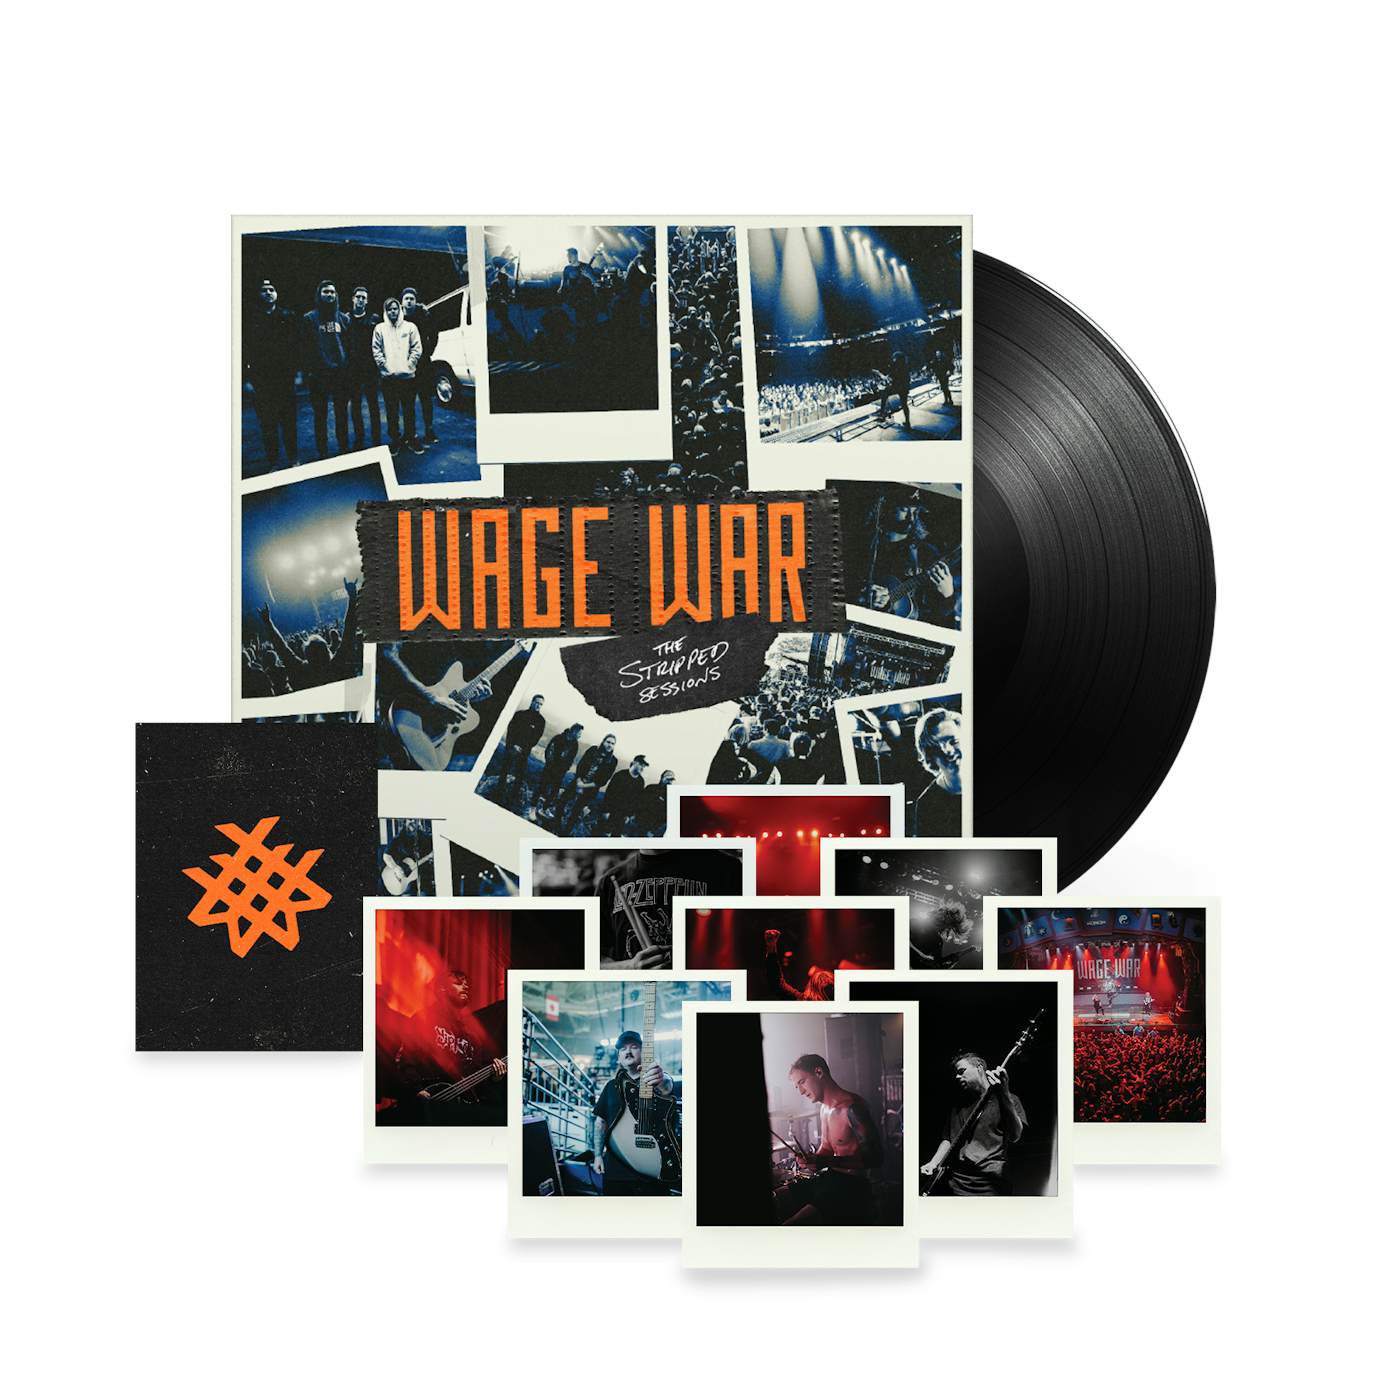 Wage War "The Stripped Sessions" Black Vinyl